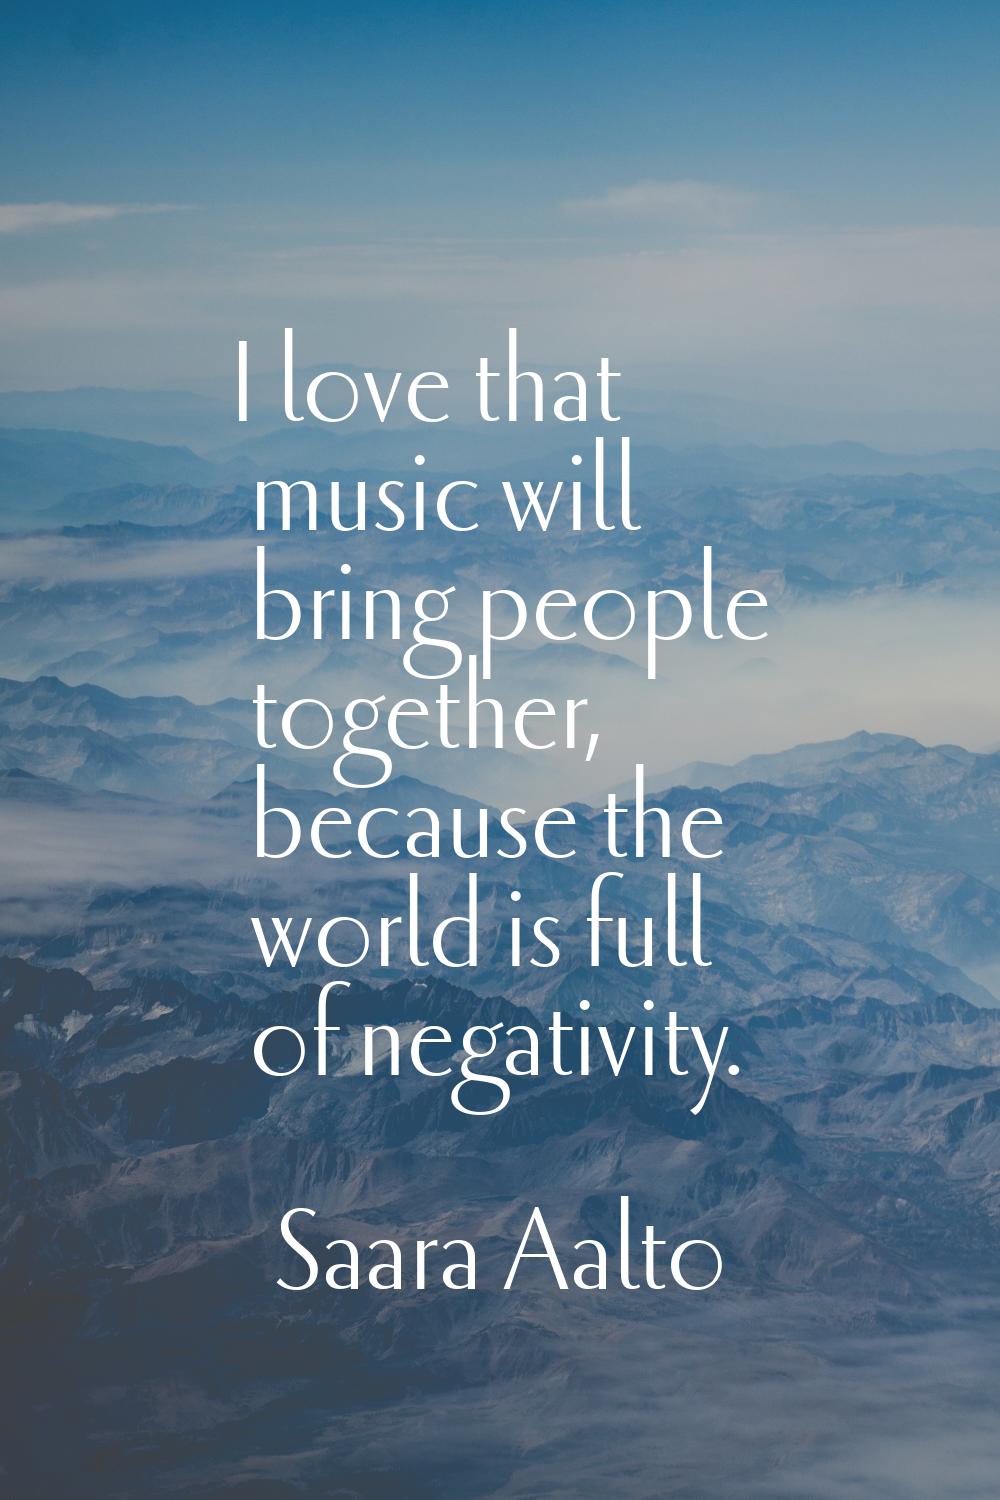 I love that music will bring people together, because the world is full of negativity.